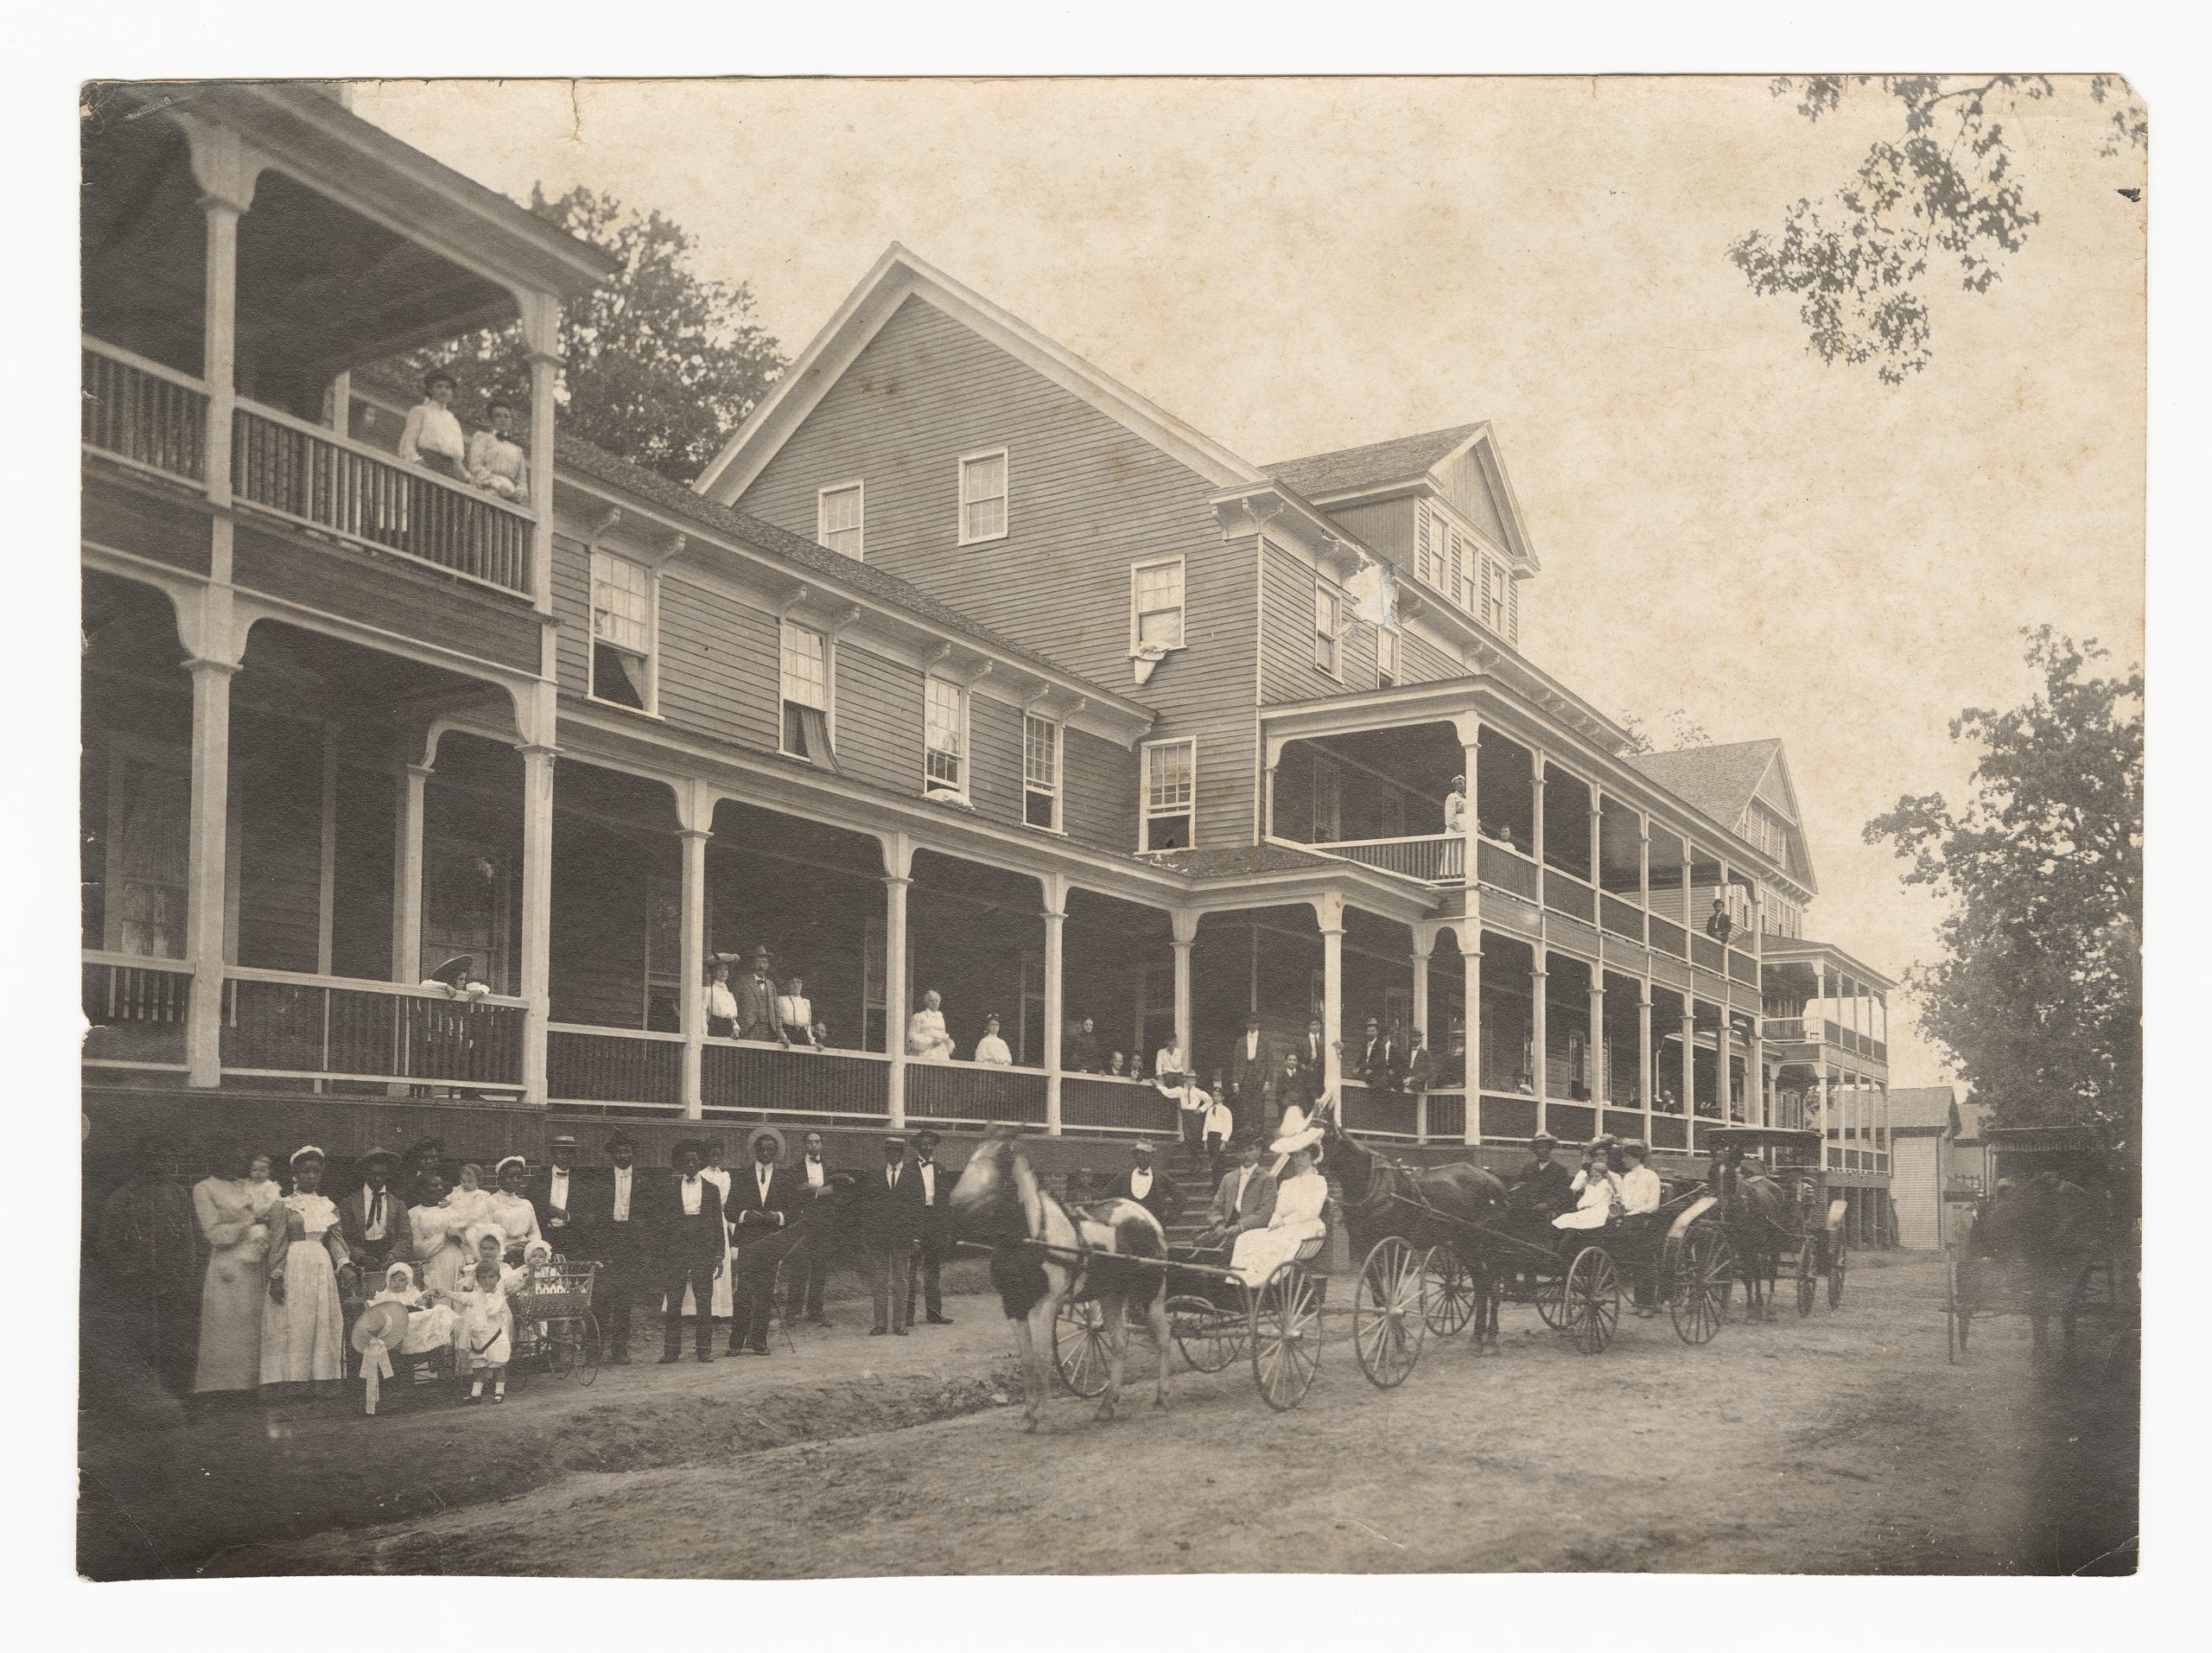 The Glenn Springs Hotel in Spartanburg County was an inn built in 1825, expanded in 1838, and enlarged in 1894 to 100 rooms. By the time the building burned in 1941, the hotel had been condemned. Photography courtesy of the South Caroliniana Library, USC